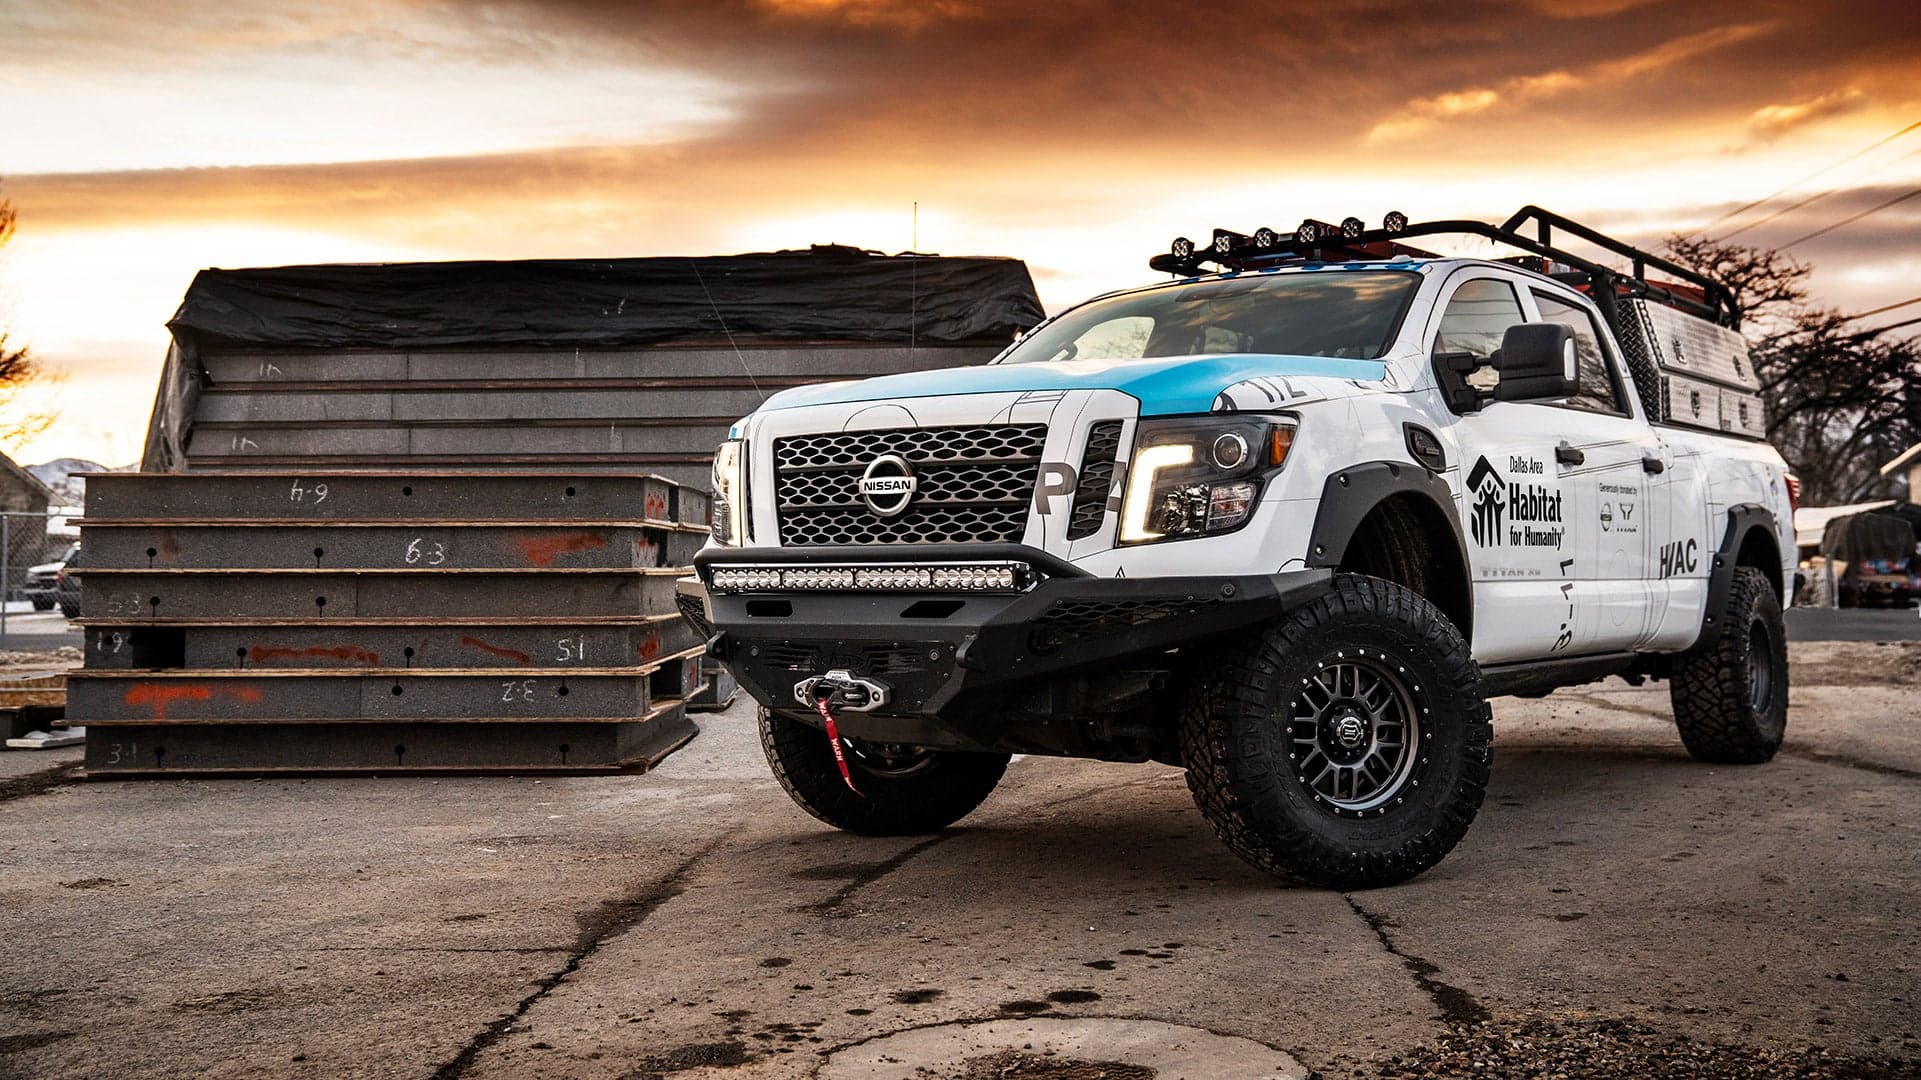 Nissan Titan Customized for Habitat for Humanity Is the Ultimate Work Pickup Truck